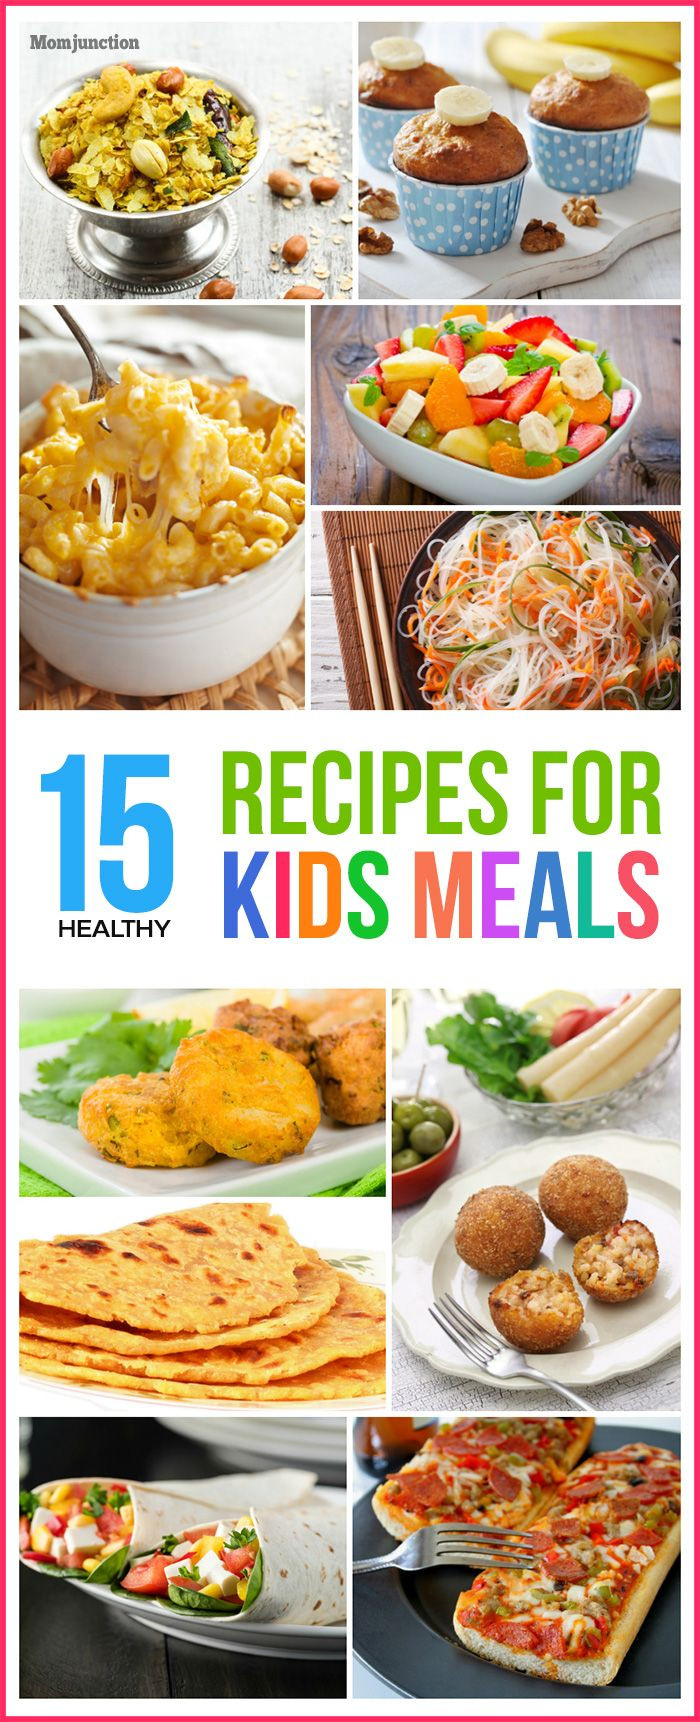 Healthy Recipes For Picky Kids
 Top 15 Healthy Recipes For Kids Meals